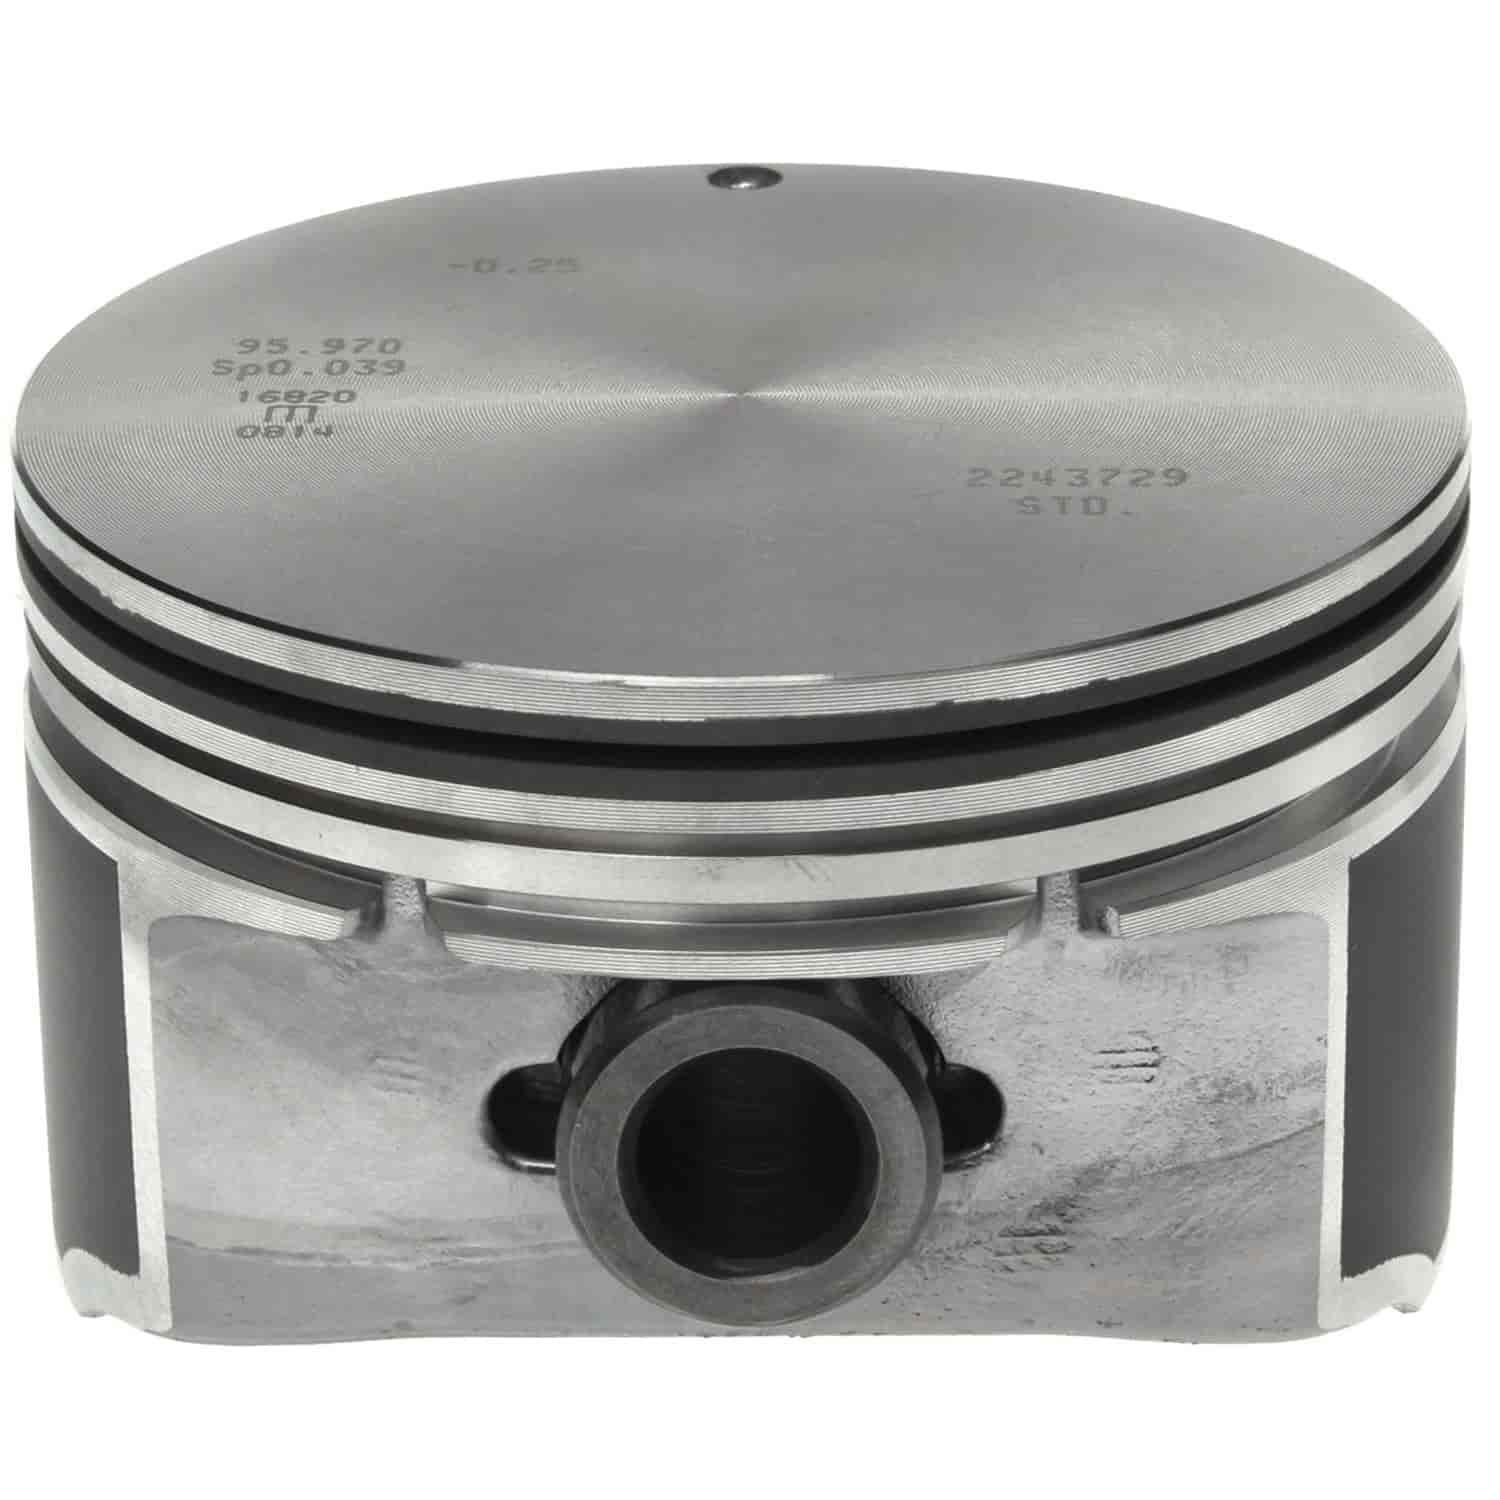 Piston Set 2005-2009 Chevy LS V8 4.8/5.3L with 3.78"/96.0mm Bore (Standard)